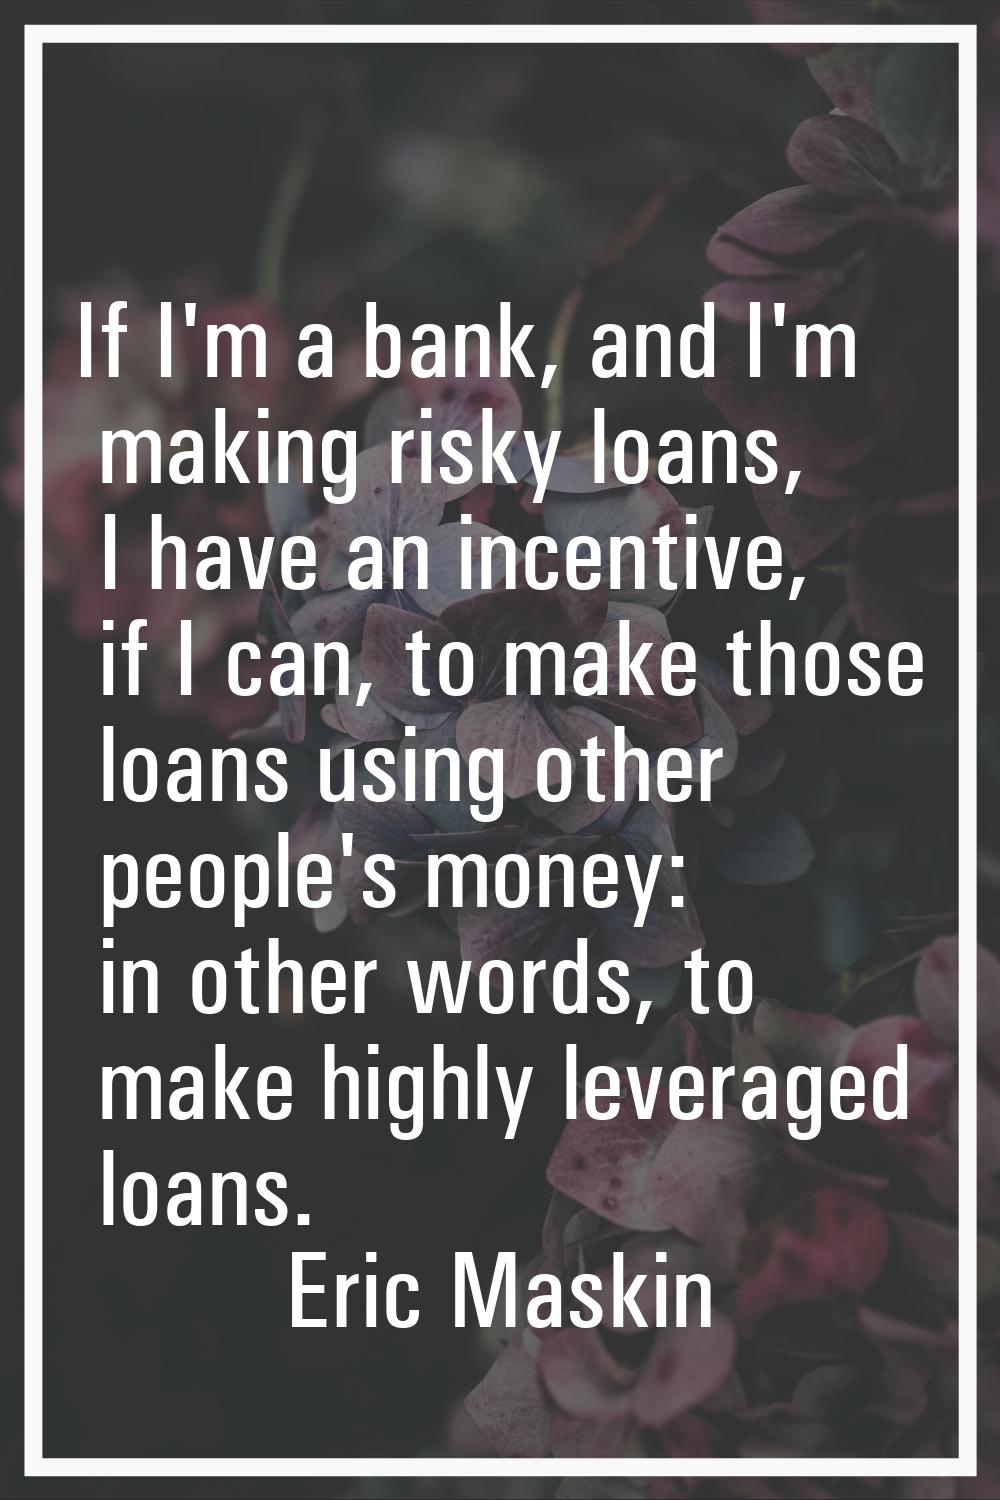 If I'm a bank, and I'm making risky loans, I have an incentive, if I can, to make those loans using